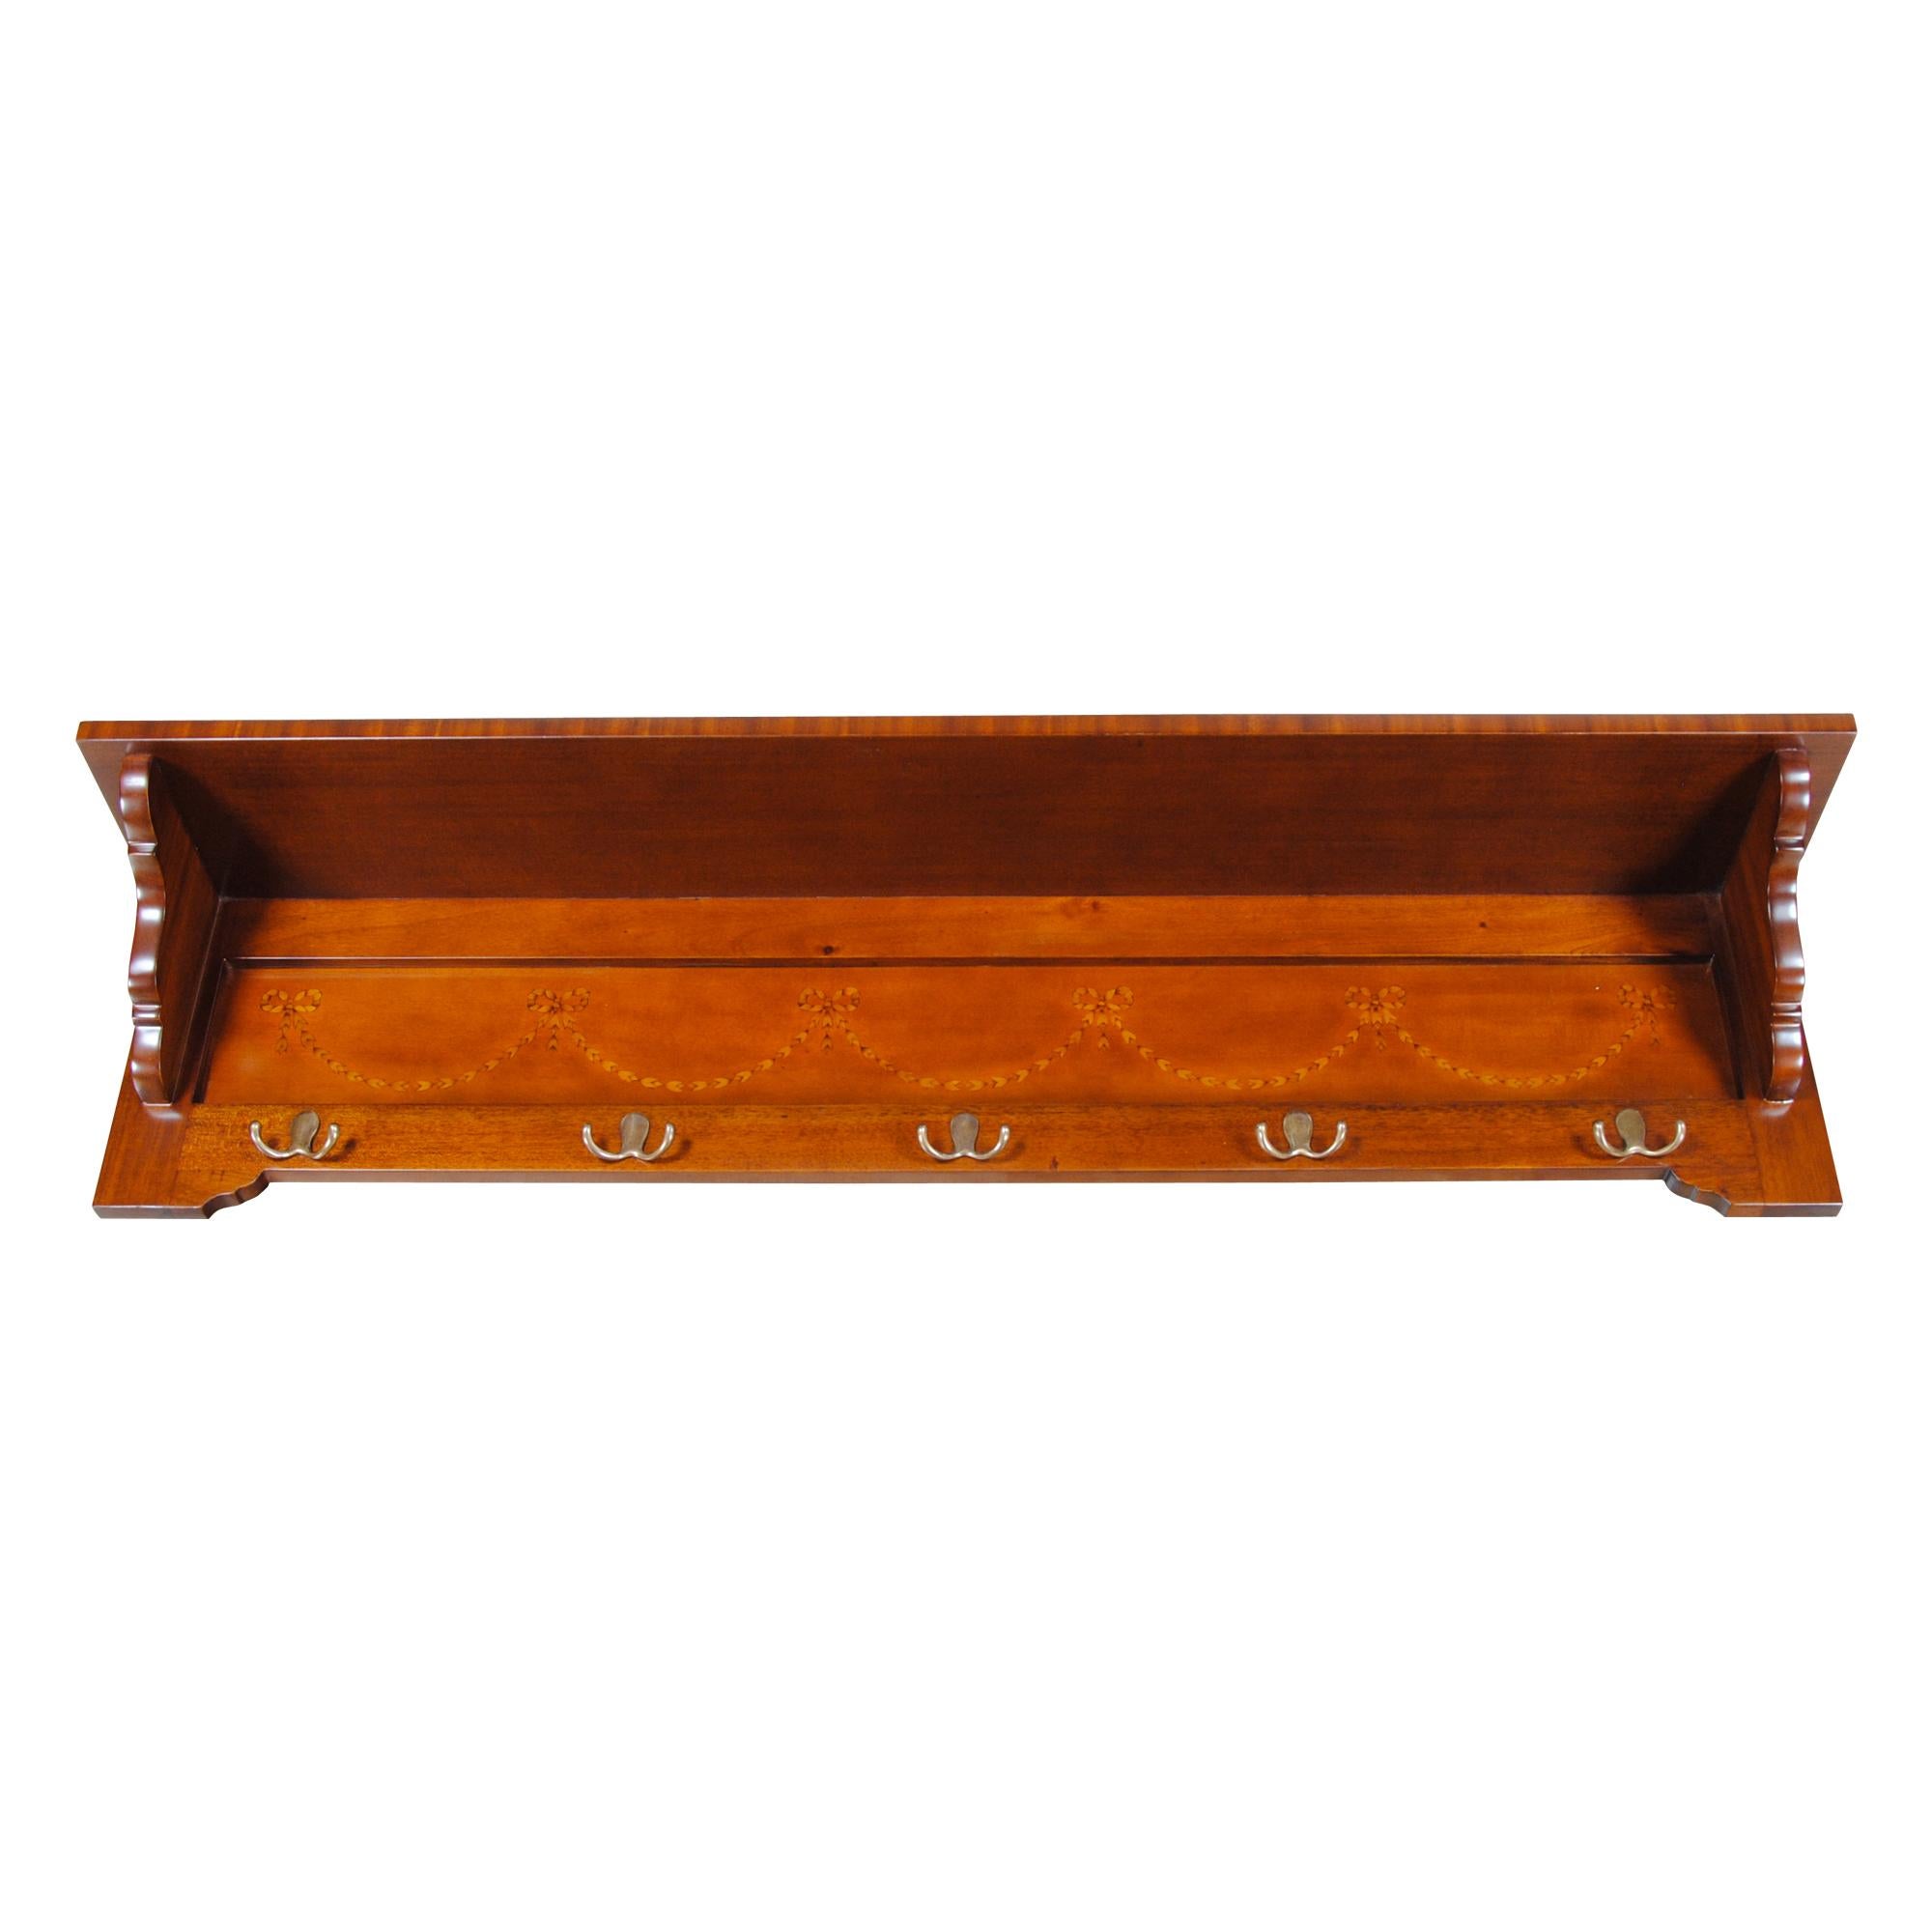 The Mahogany Coat Rack Shelf by Niagara Furniture is a great accessory that is both useful and decorative. Created from the finest mahogany solids and veneers the overall shape and style of the piece will fit in with almost any decor and add a